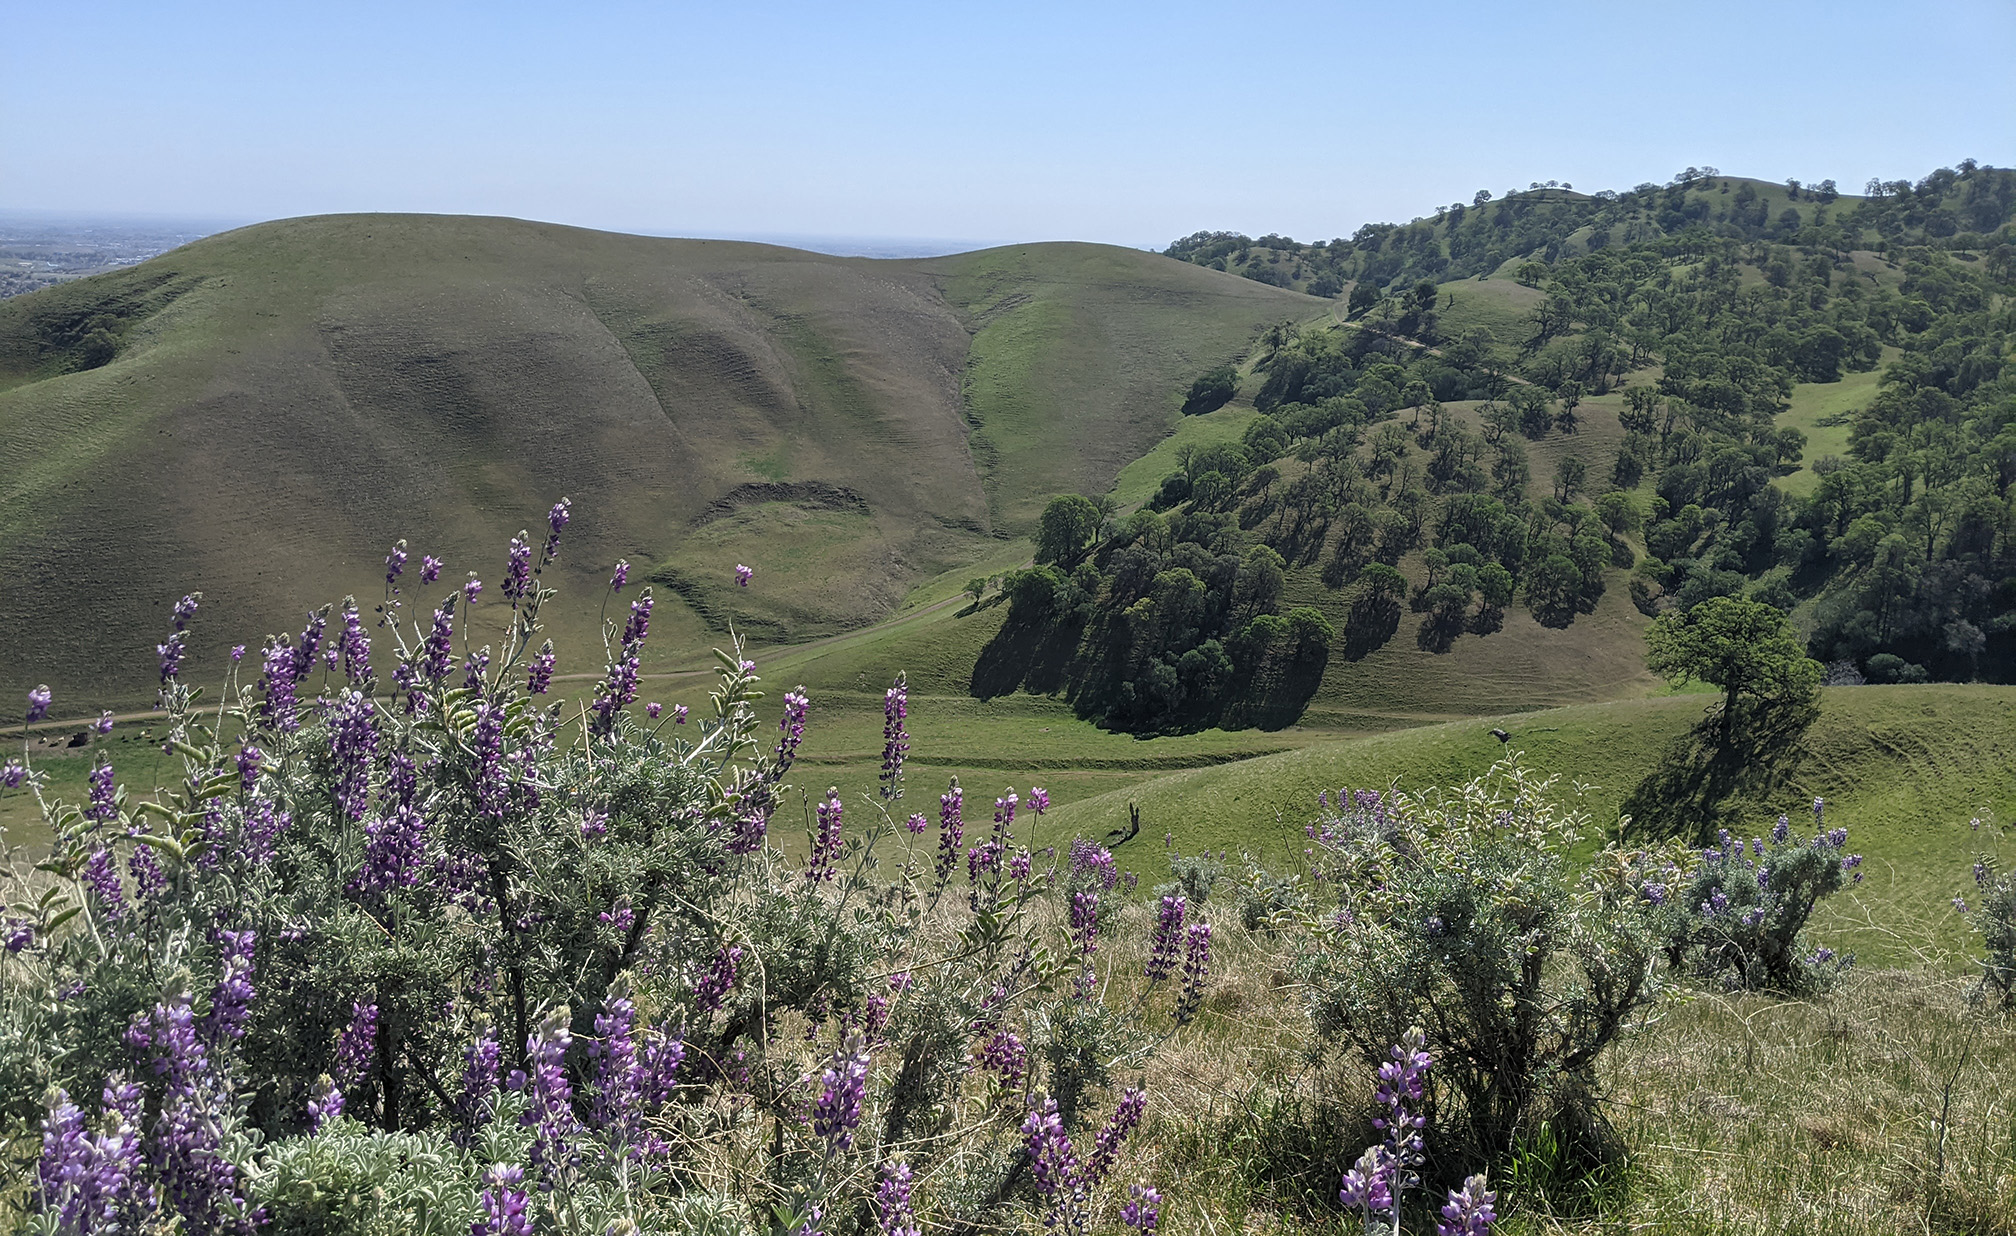 A view of a hilly landscape beneath a cloudless blue sky. The hillsides are covered in green grass with woodlands and scattered round-shaped oak trees. In the foreground is a patch of lupines with tall spikes of purple flowers.